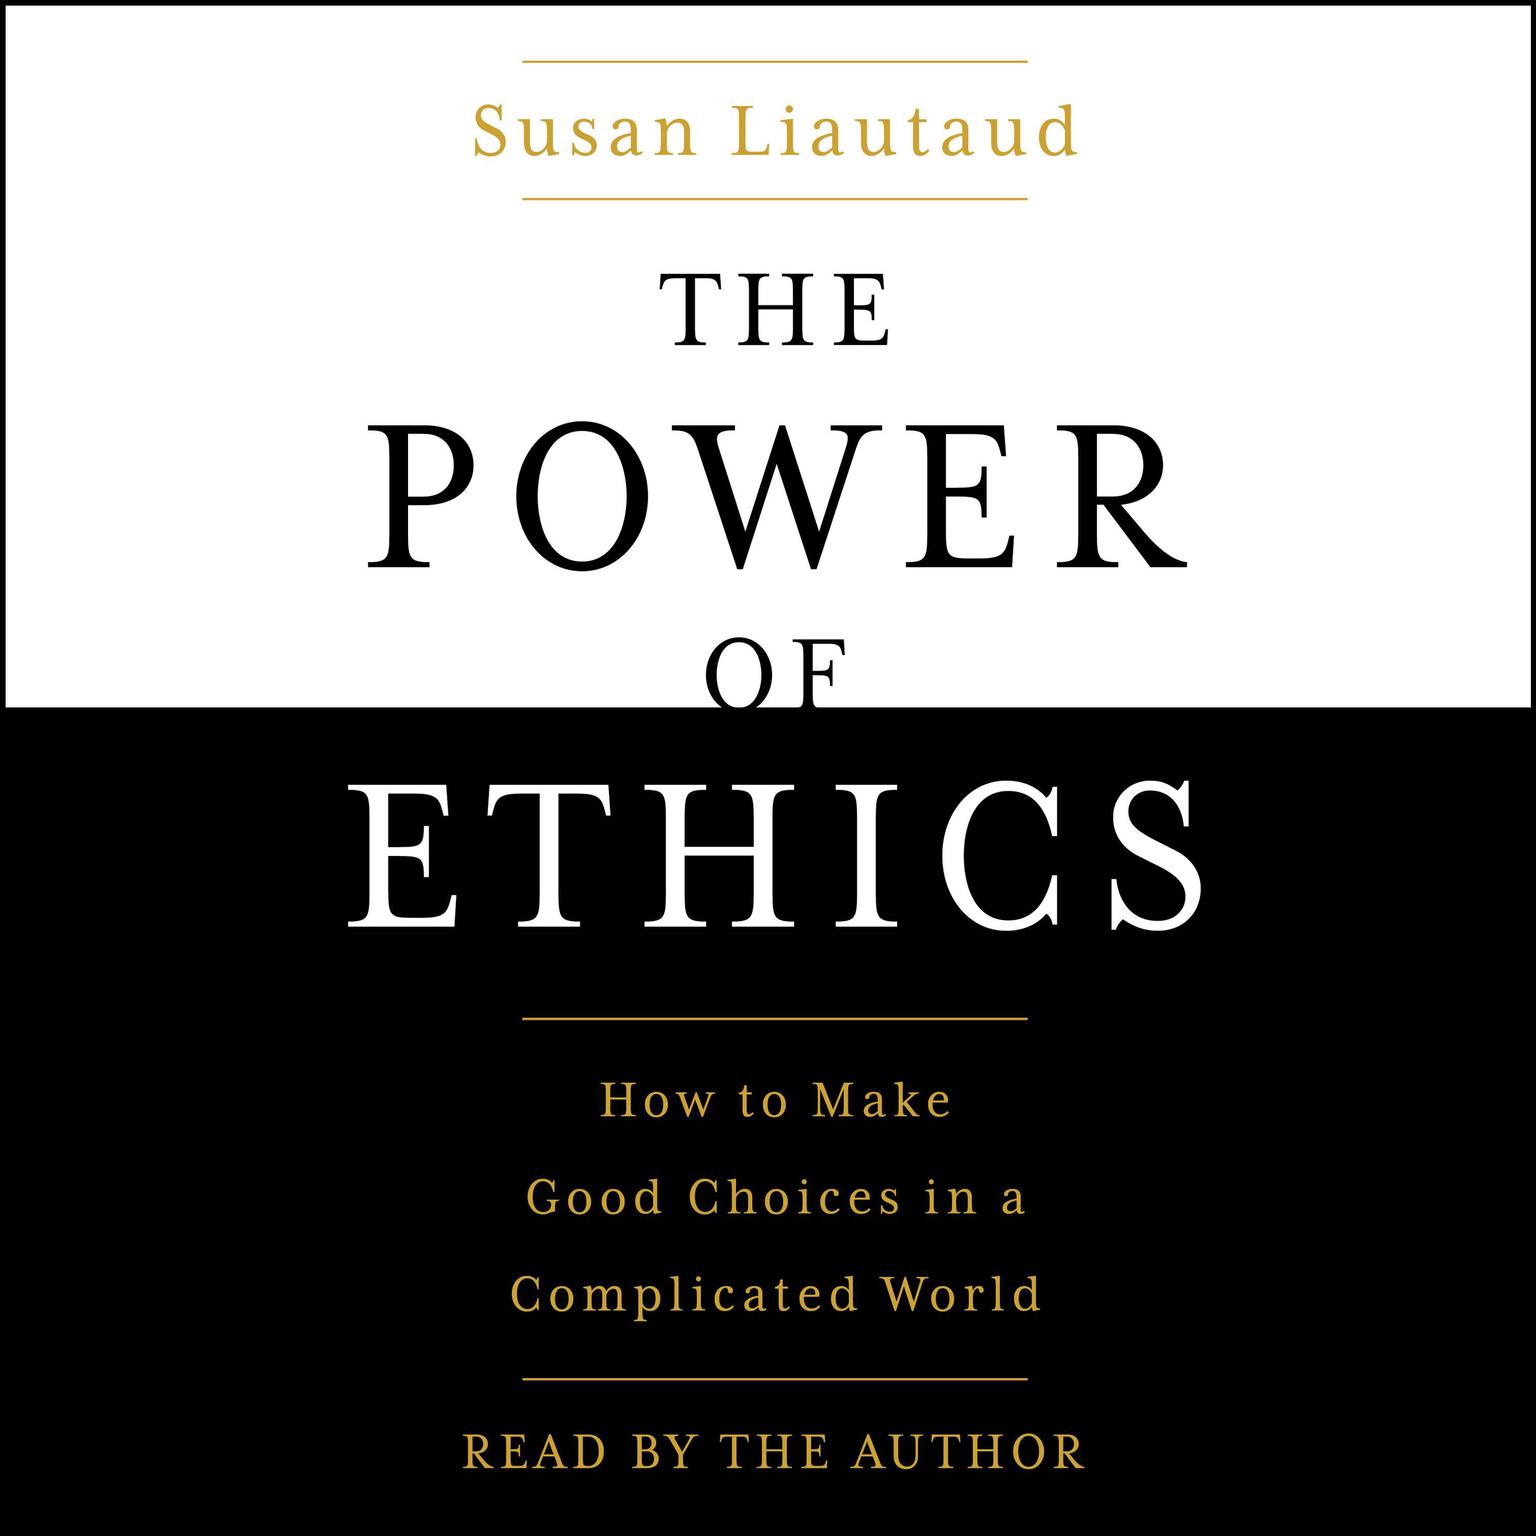 The Power of Ethics: How to Make Good Choices When Our Culture Is on the Edge Audiobook, by Susan Liautaud